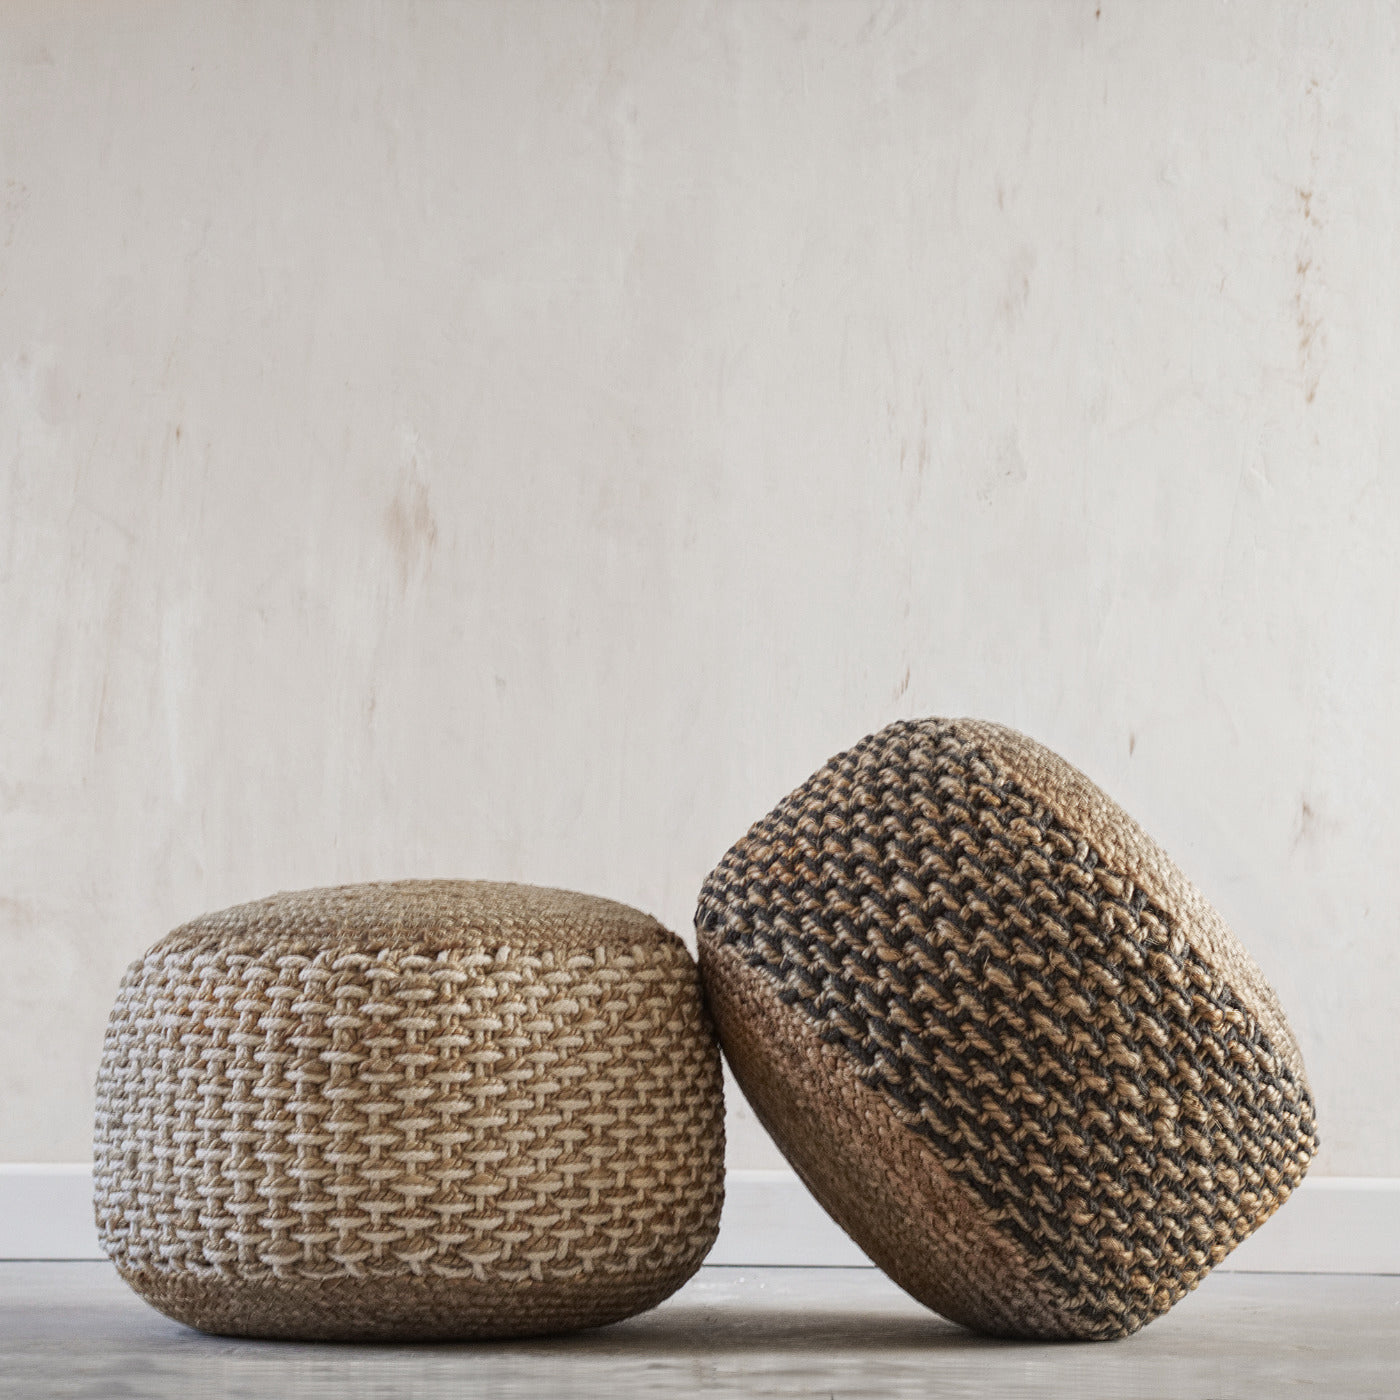 Moroccan living room accessories - pouffes and ottomans